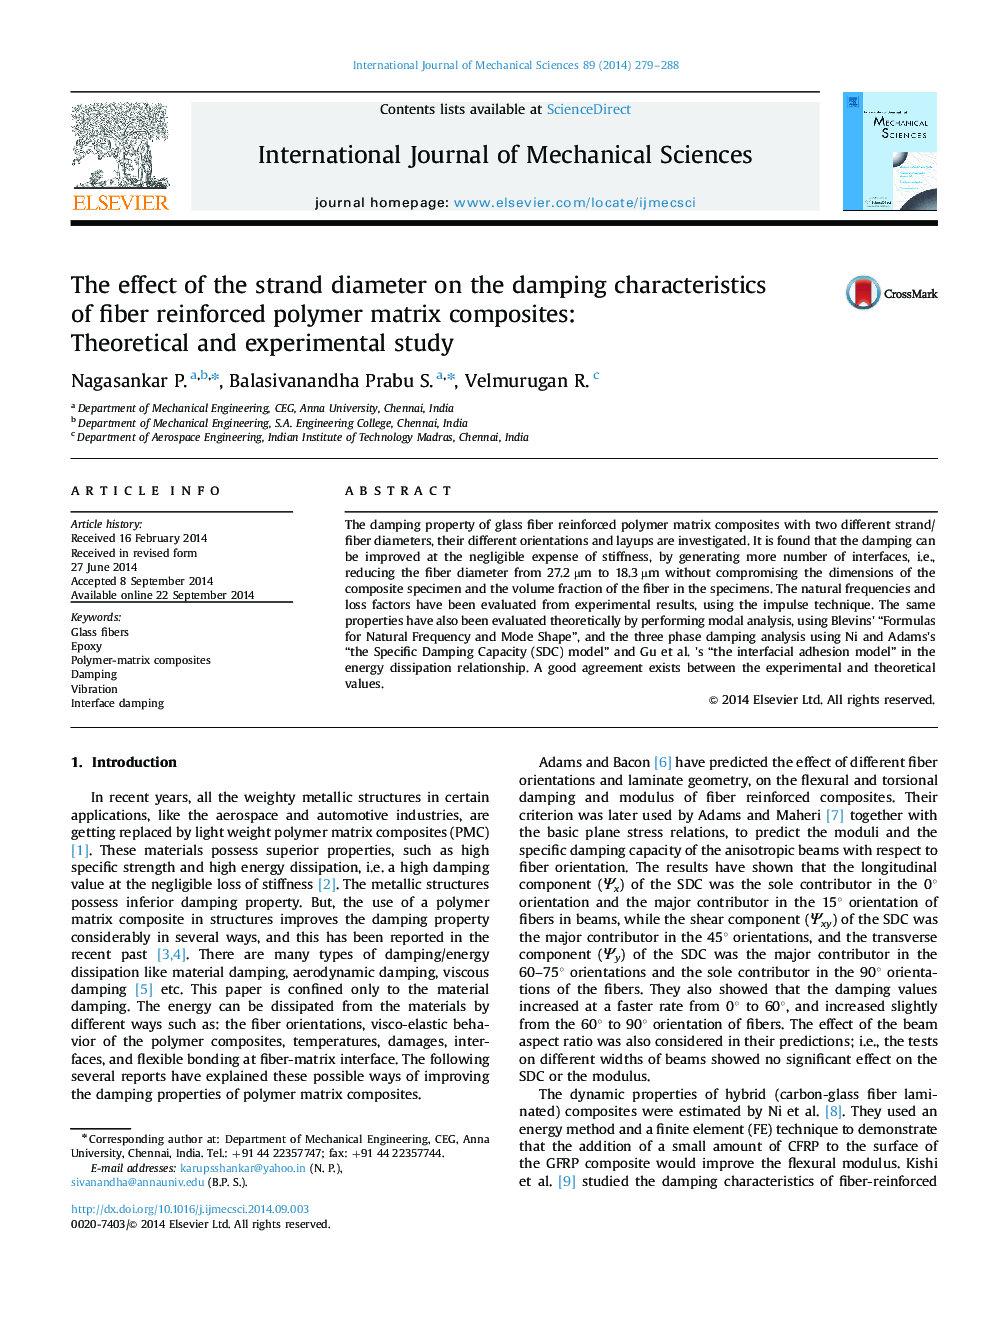 The effect of the strand diameter on the damping characteristics of fiber reinforced polymer matrix composites: Theoretical and experimental study